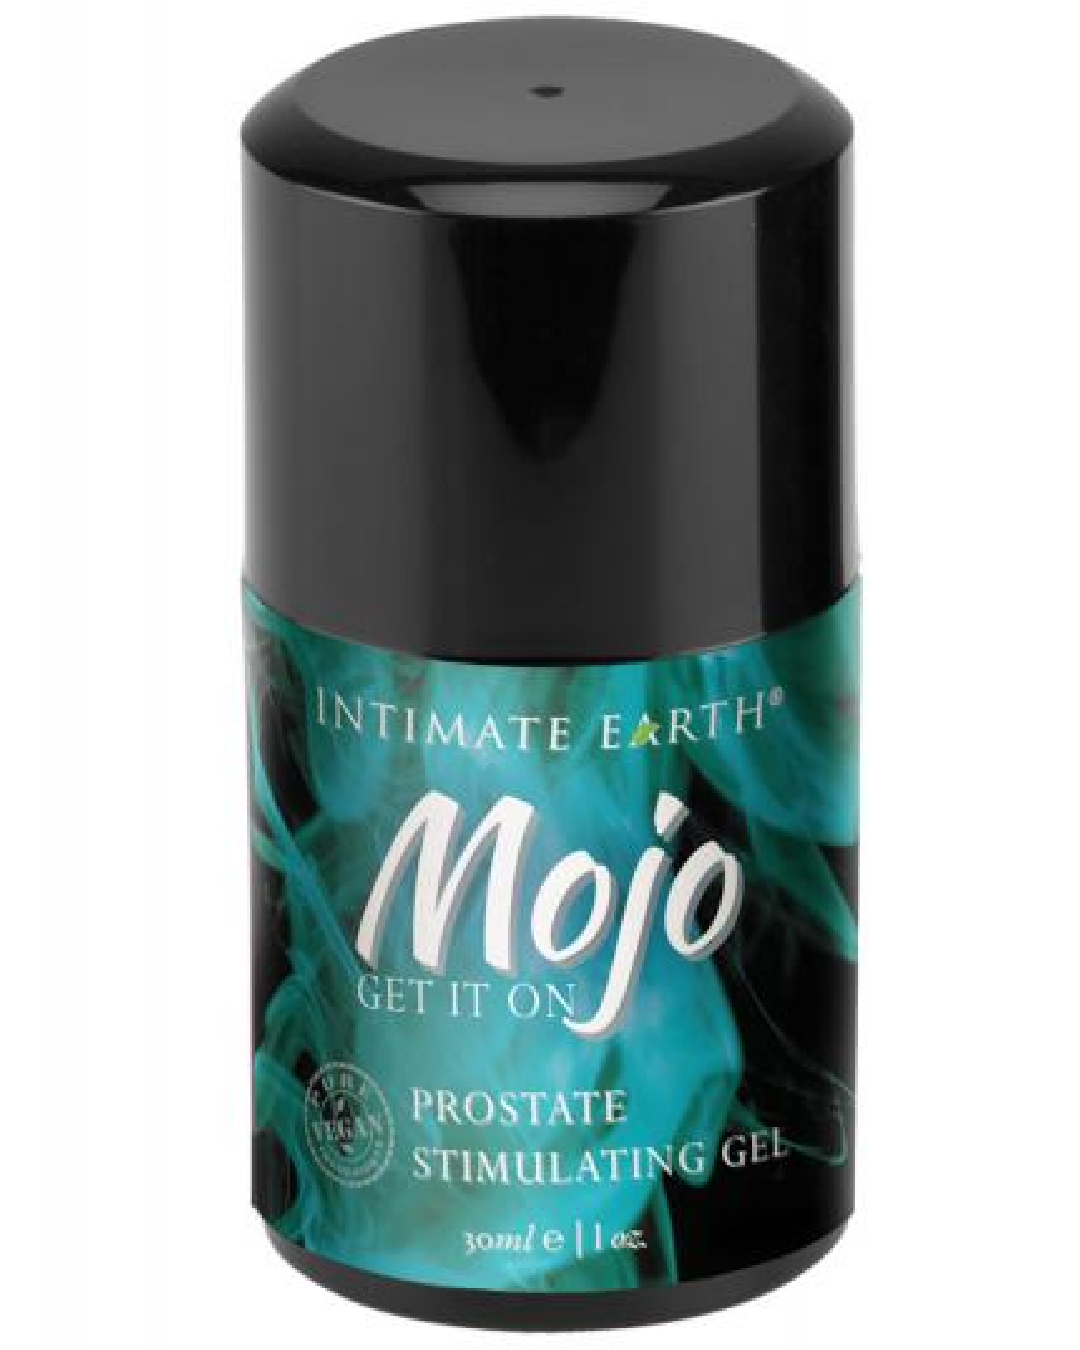 Mojo Prostate Stimulating Gel by Intimate Earth 1 oz product close up 